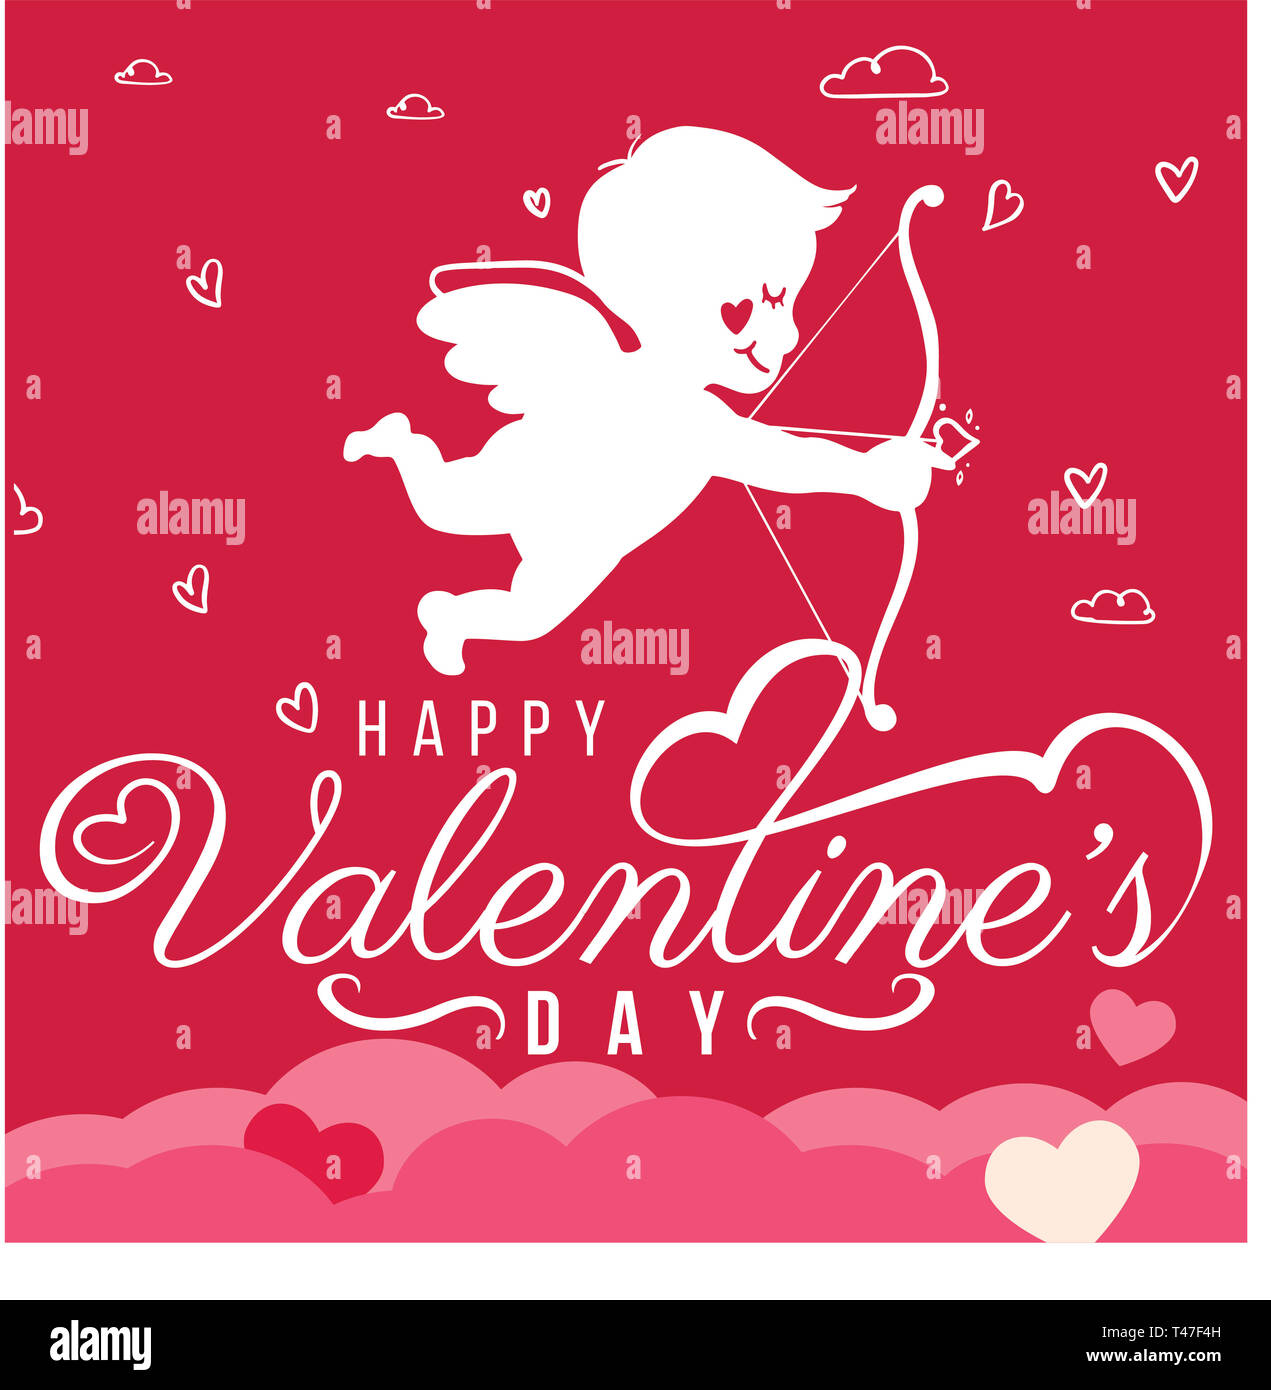 Vector graphic Illustration of Valentine day in February Stock Photo ...